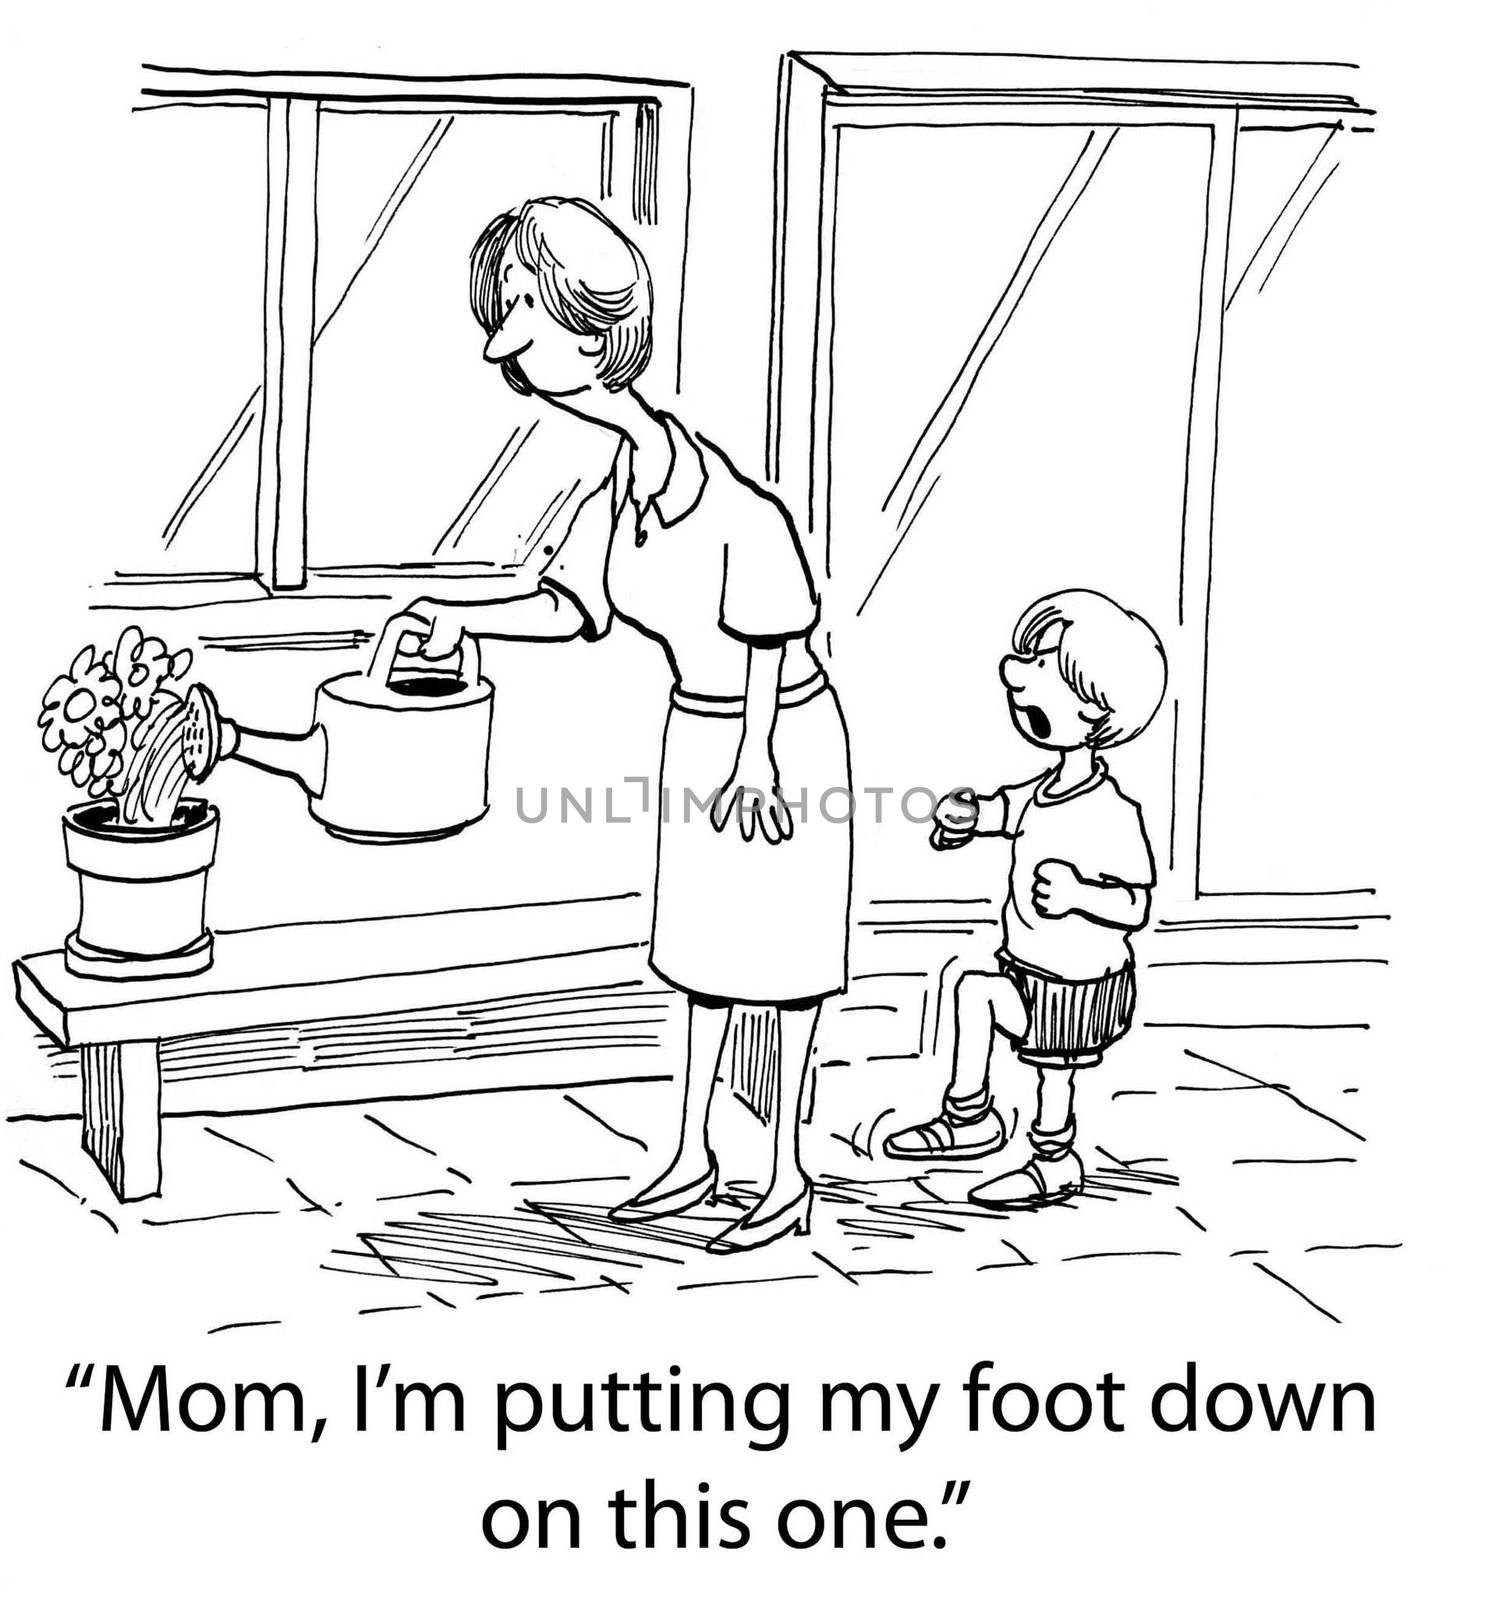 The son is upset and is imitating comments his mother has made, "Mom, I'm putting my foot down on this one".